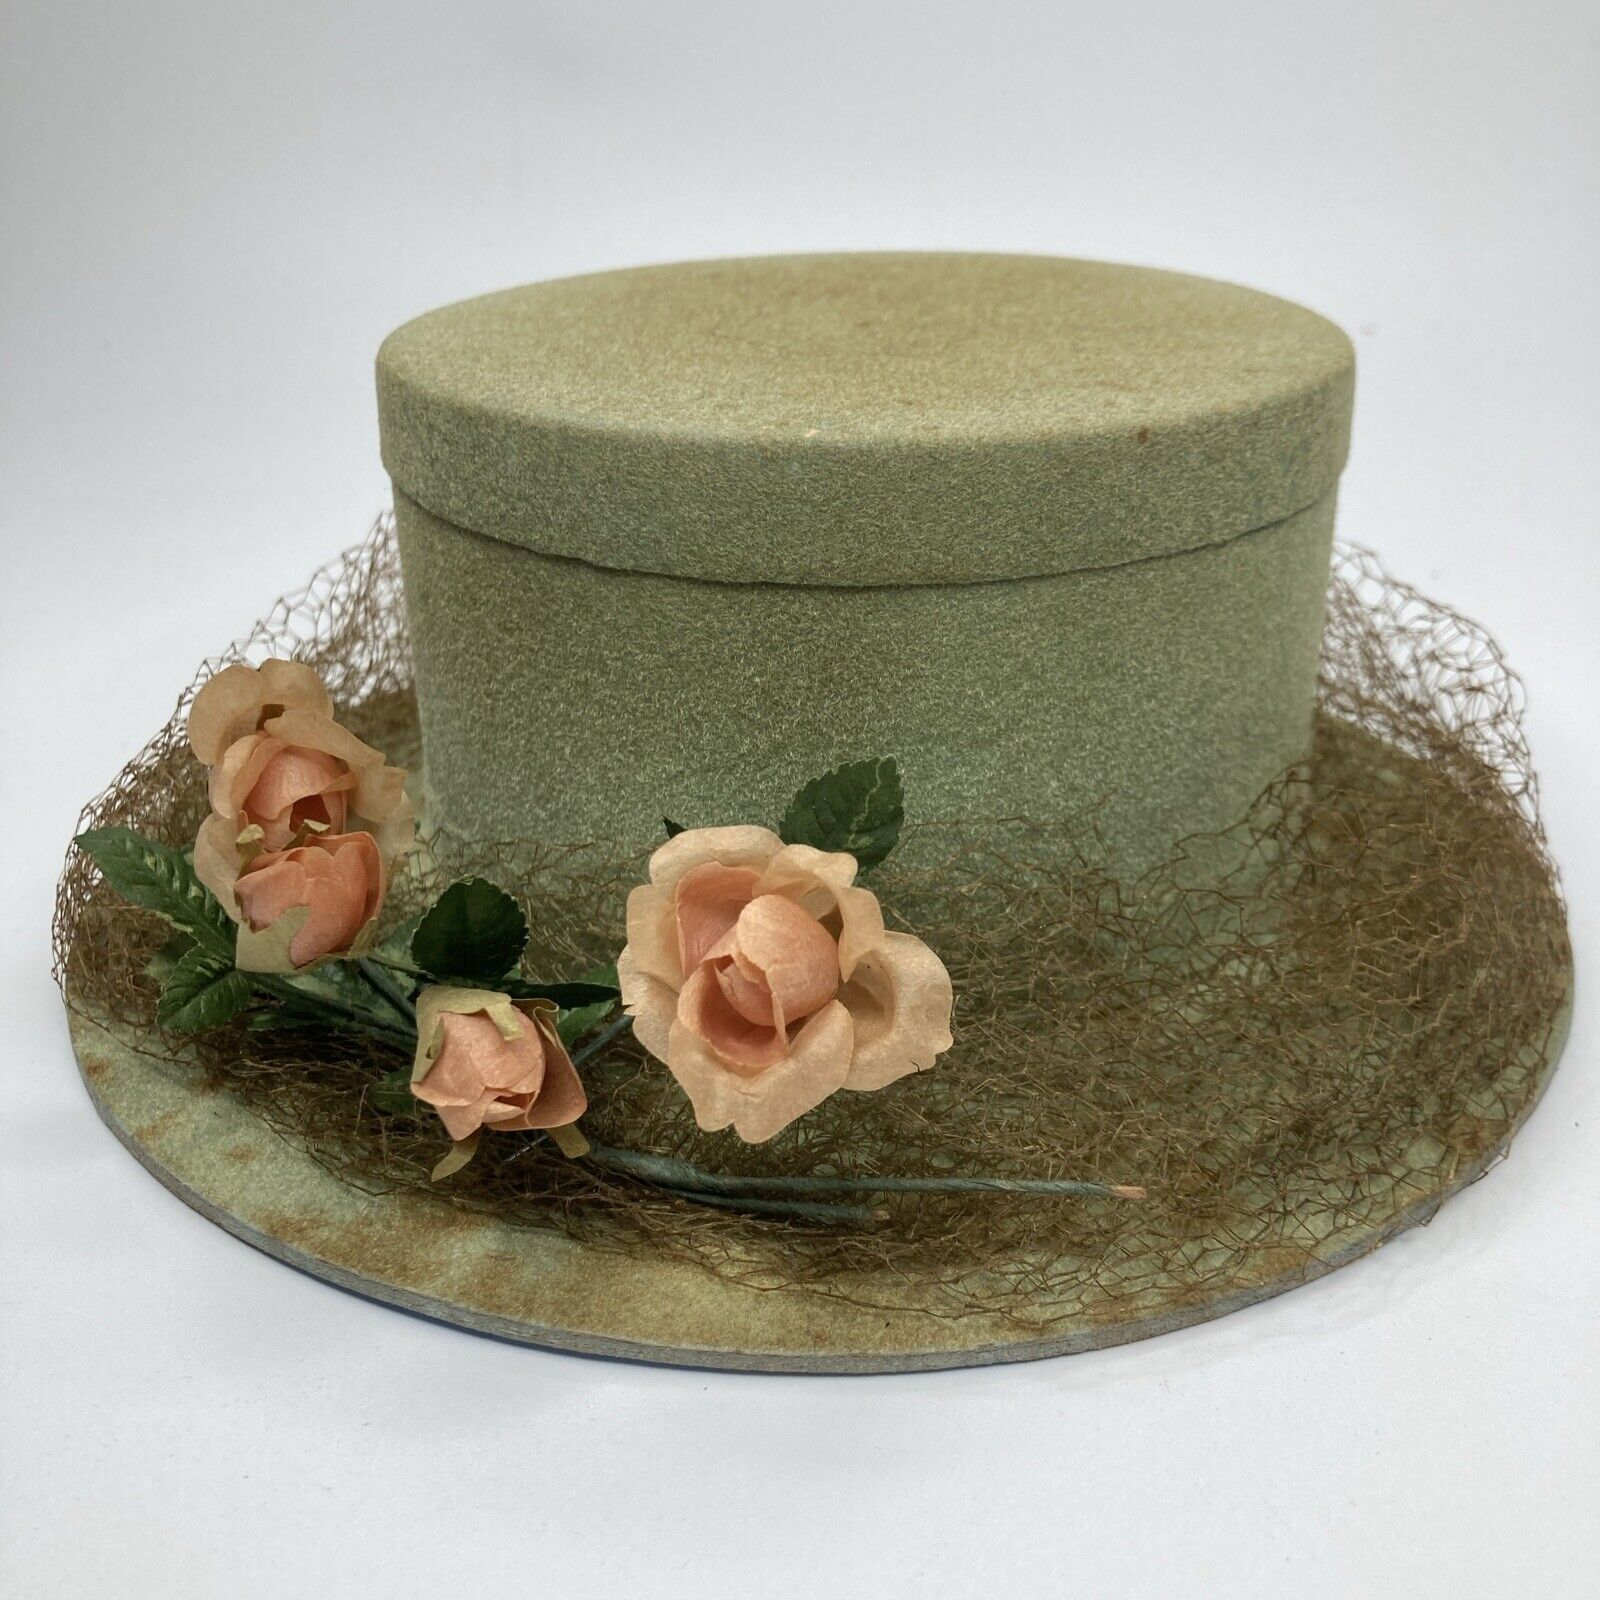 Antique EASTER HAT / BONNET CANDY BOX ~ Flocked w/ Netting & Millinery Flowers